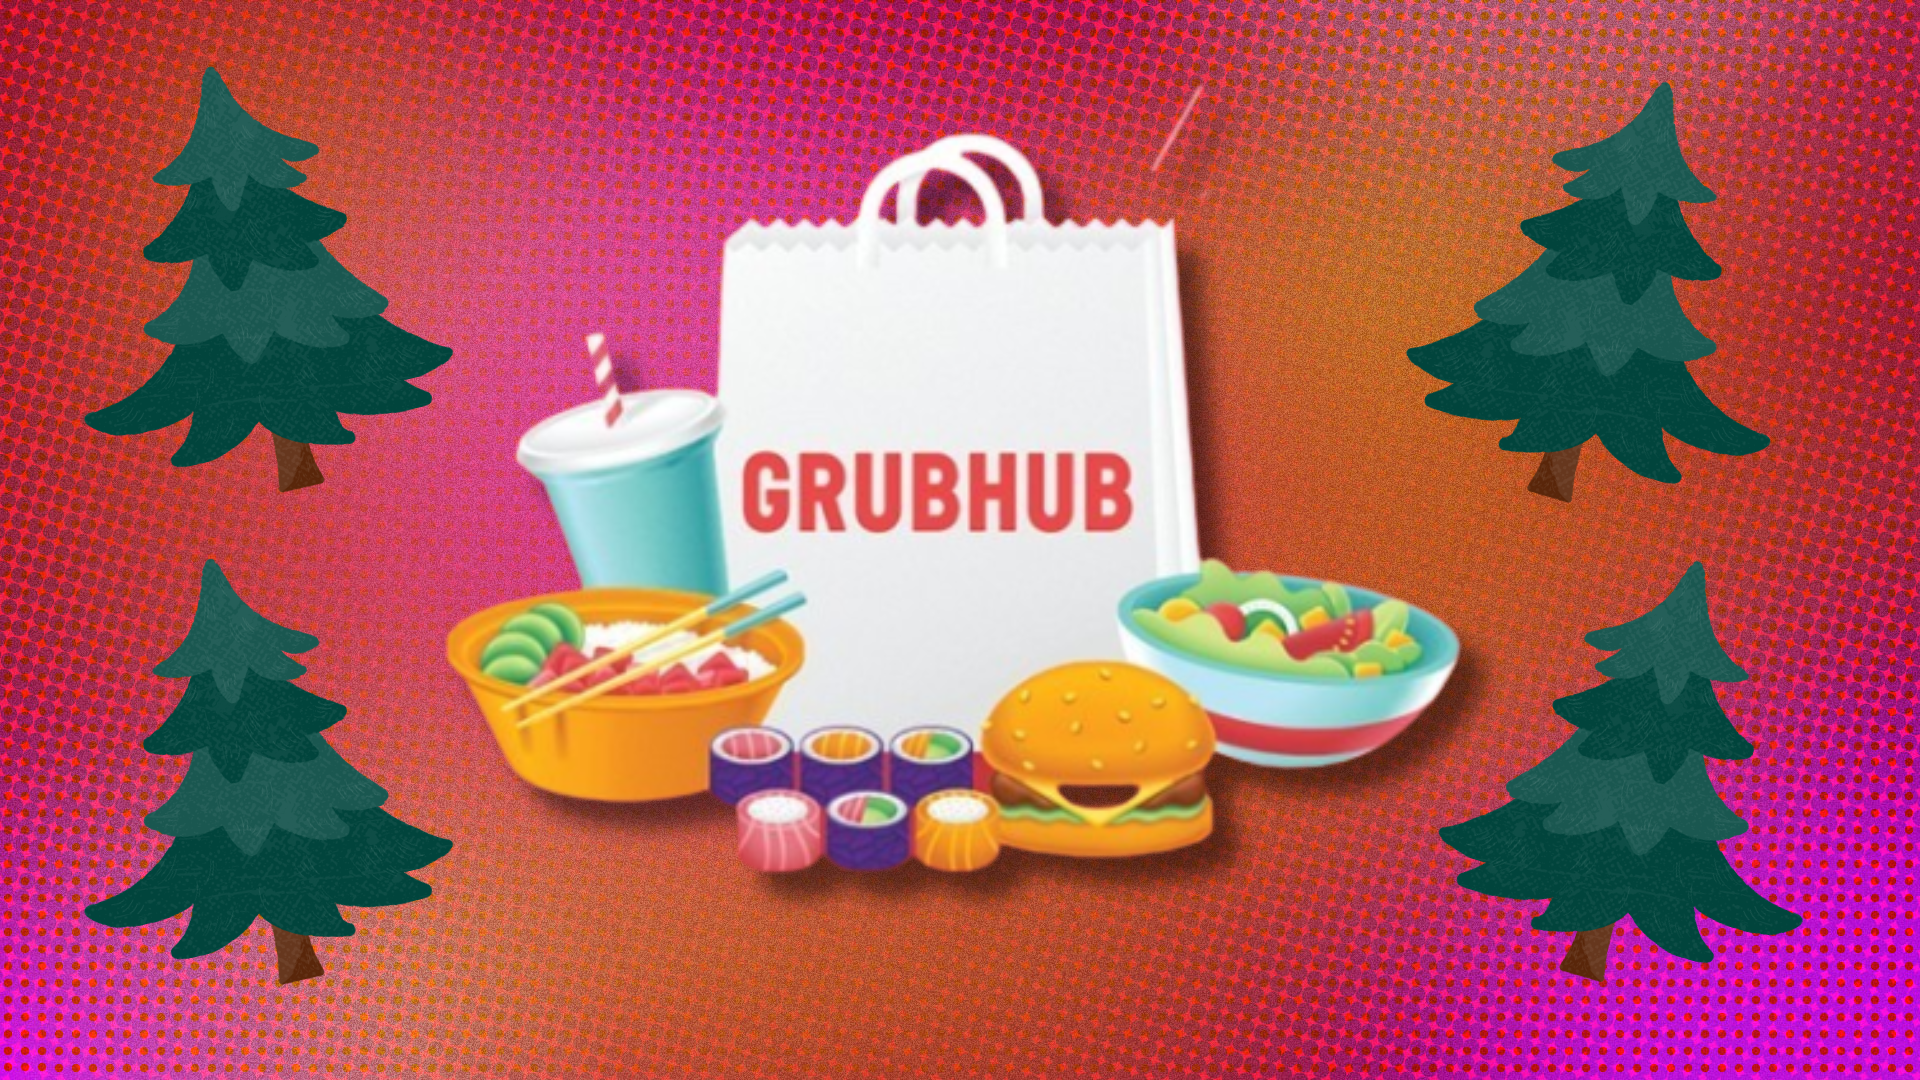 The Grubhub logo on an illustrated paper bag surrounded by food, overlaid on a background decorated with clip art Christmas trees